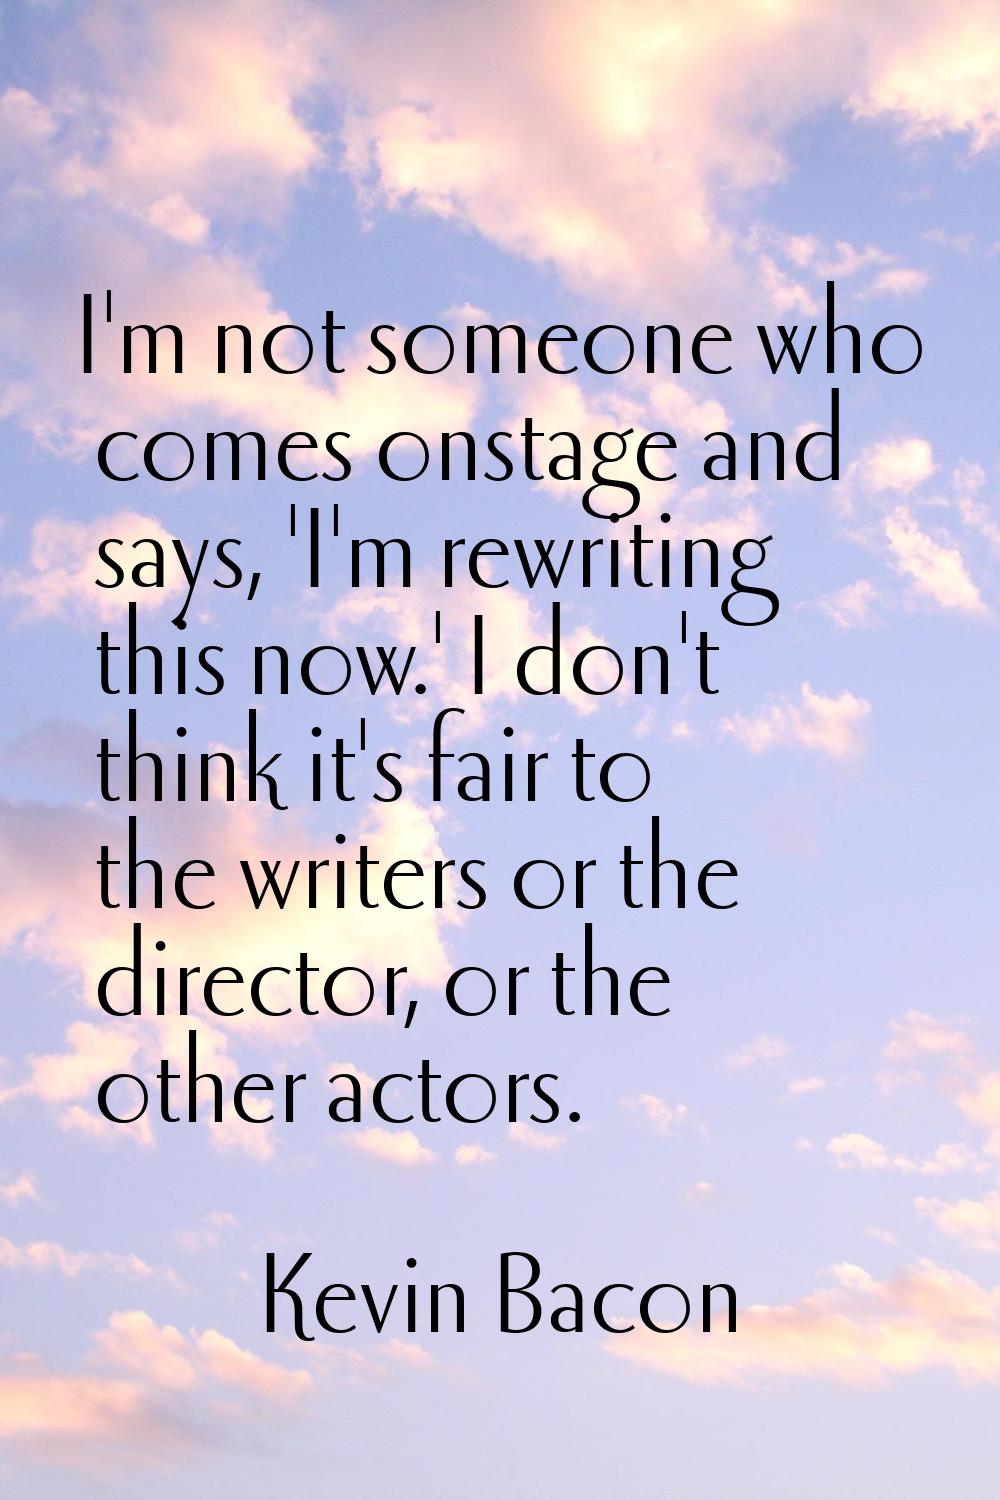 I'm not someone who comes onstage and says, 'I'm rewriting this now.' I don't think it's fair to th